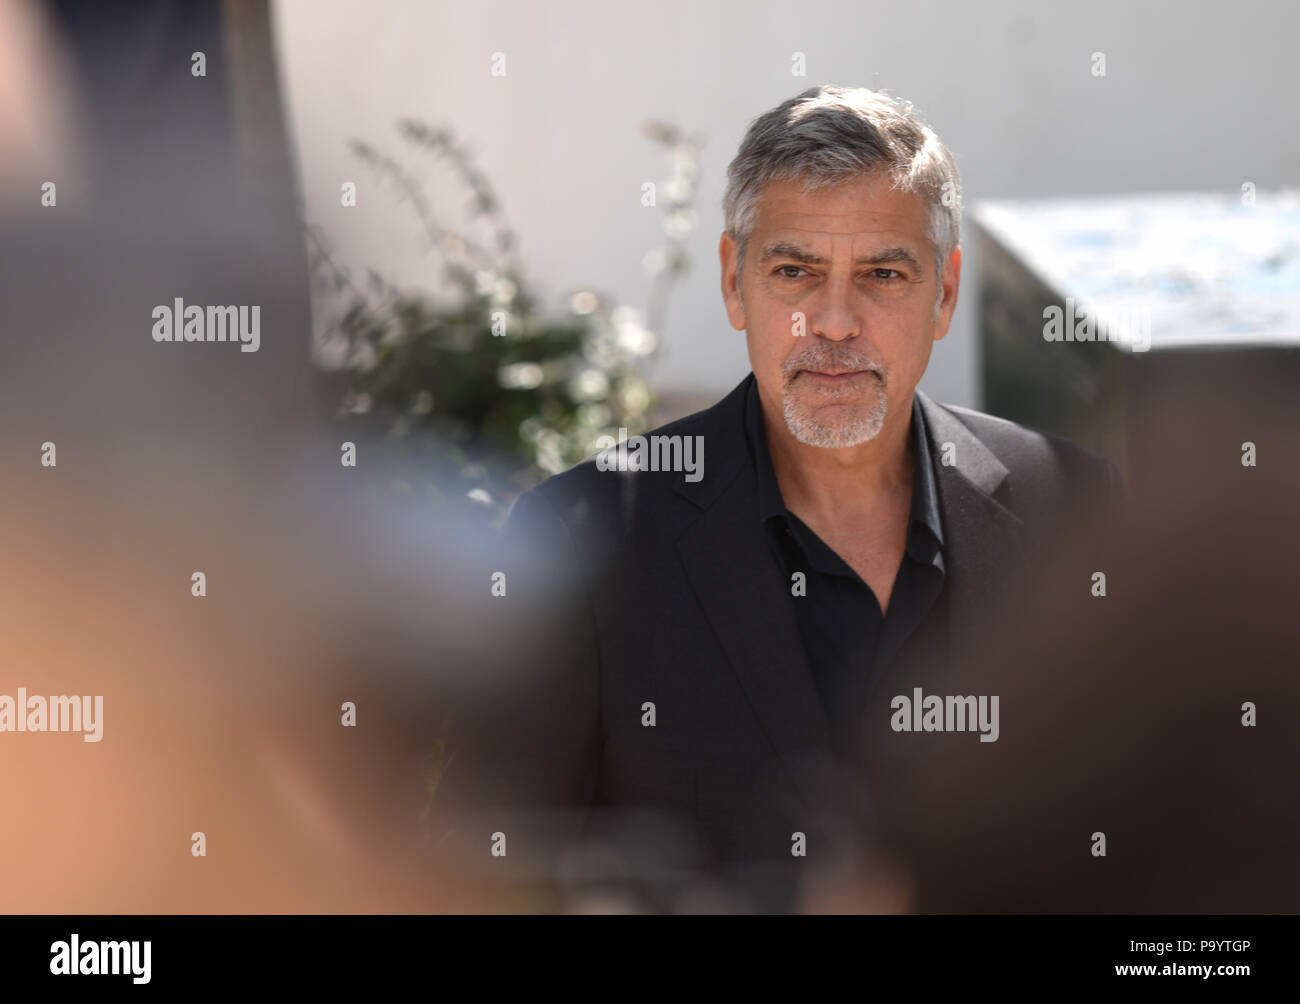 May 12, 2016 - Cannes, France: George Clooney attends the 'Money Monster' photocall during the 69th Cannes film festival. George Clooney lors du 69eme Festival de Cannes. *** FRANCE OUT / NO SALES TO FRENCH MEDIA *** Stock Photo